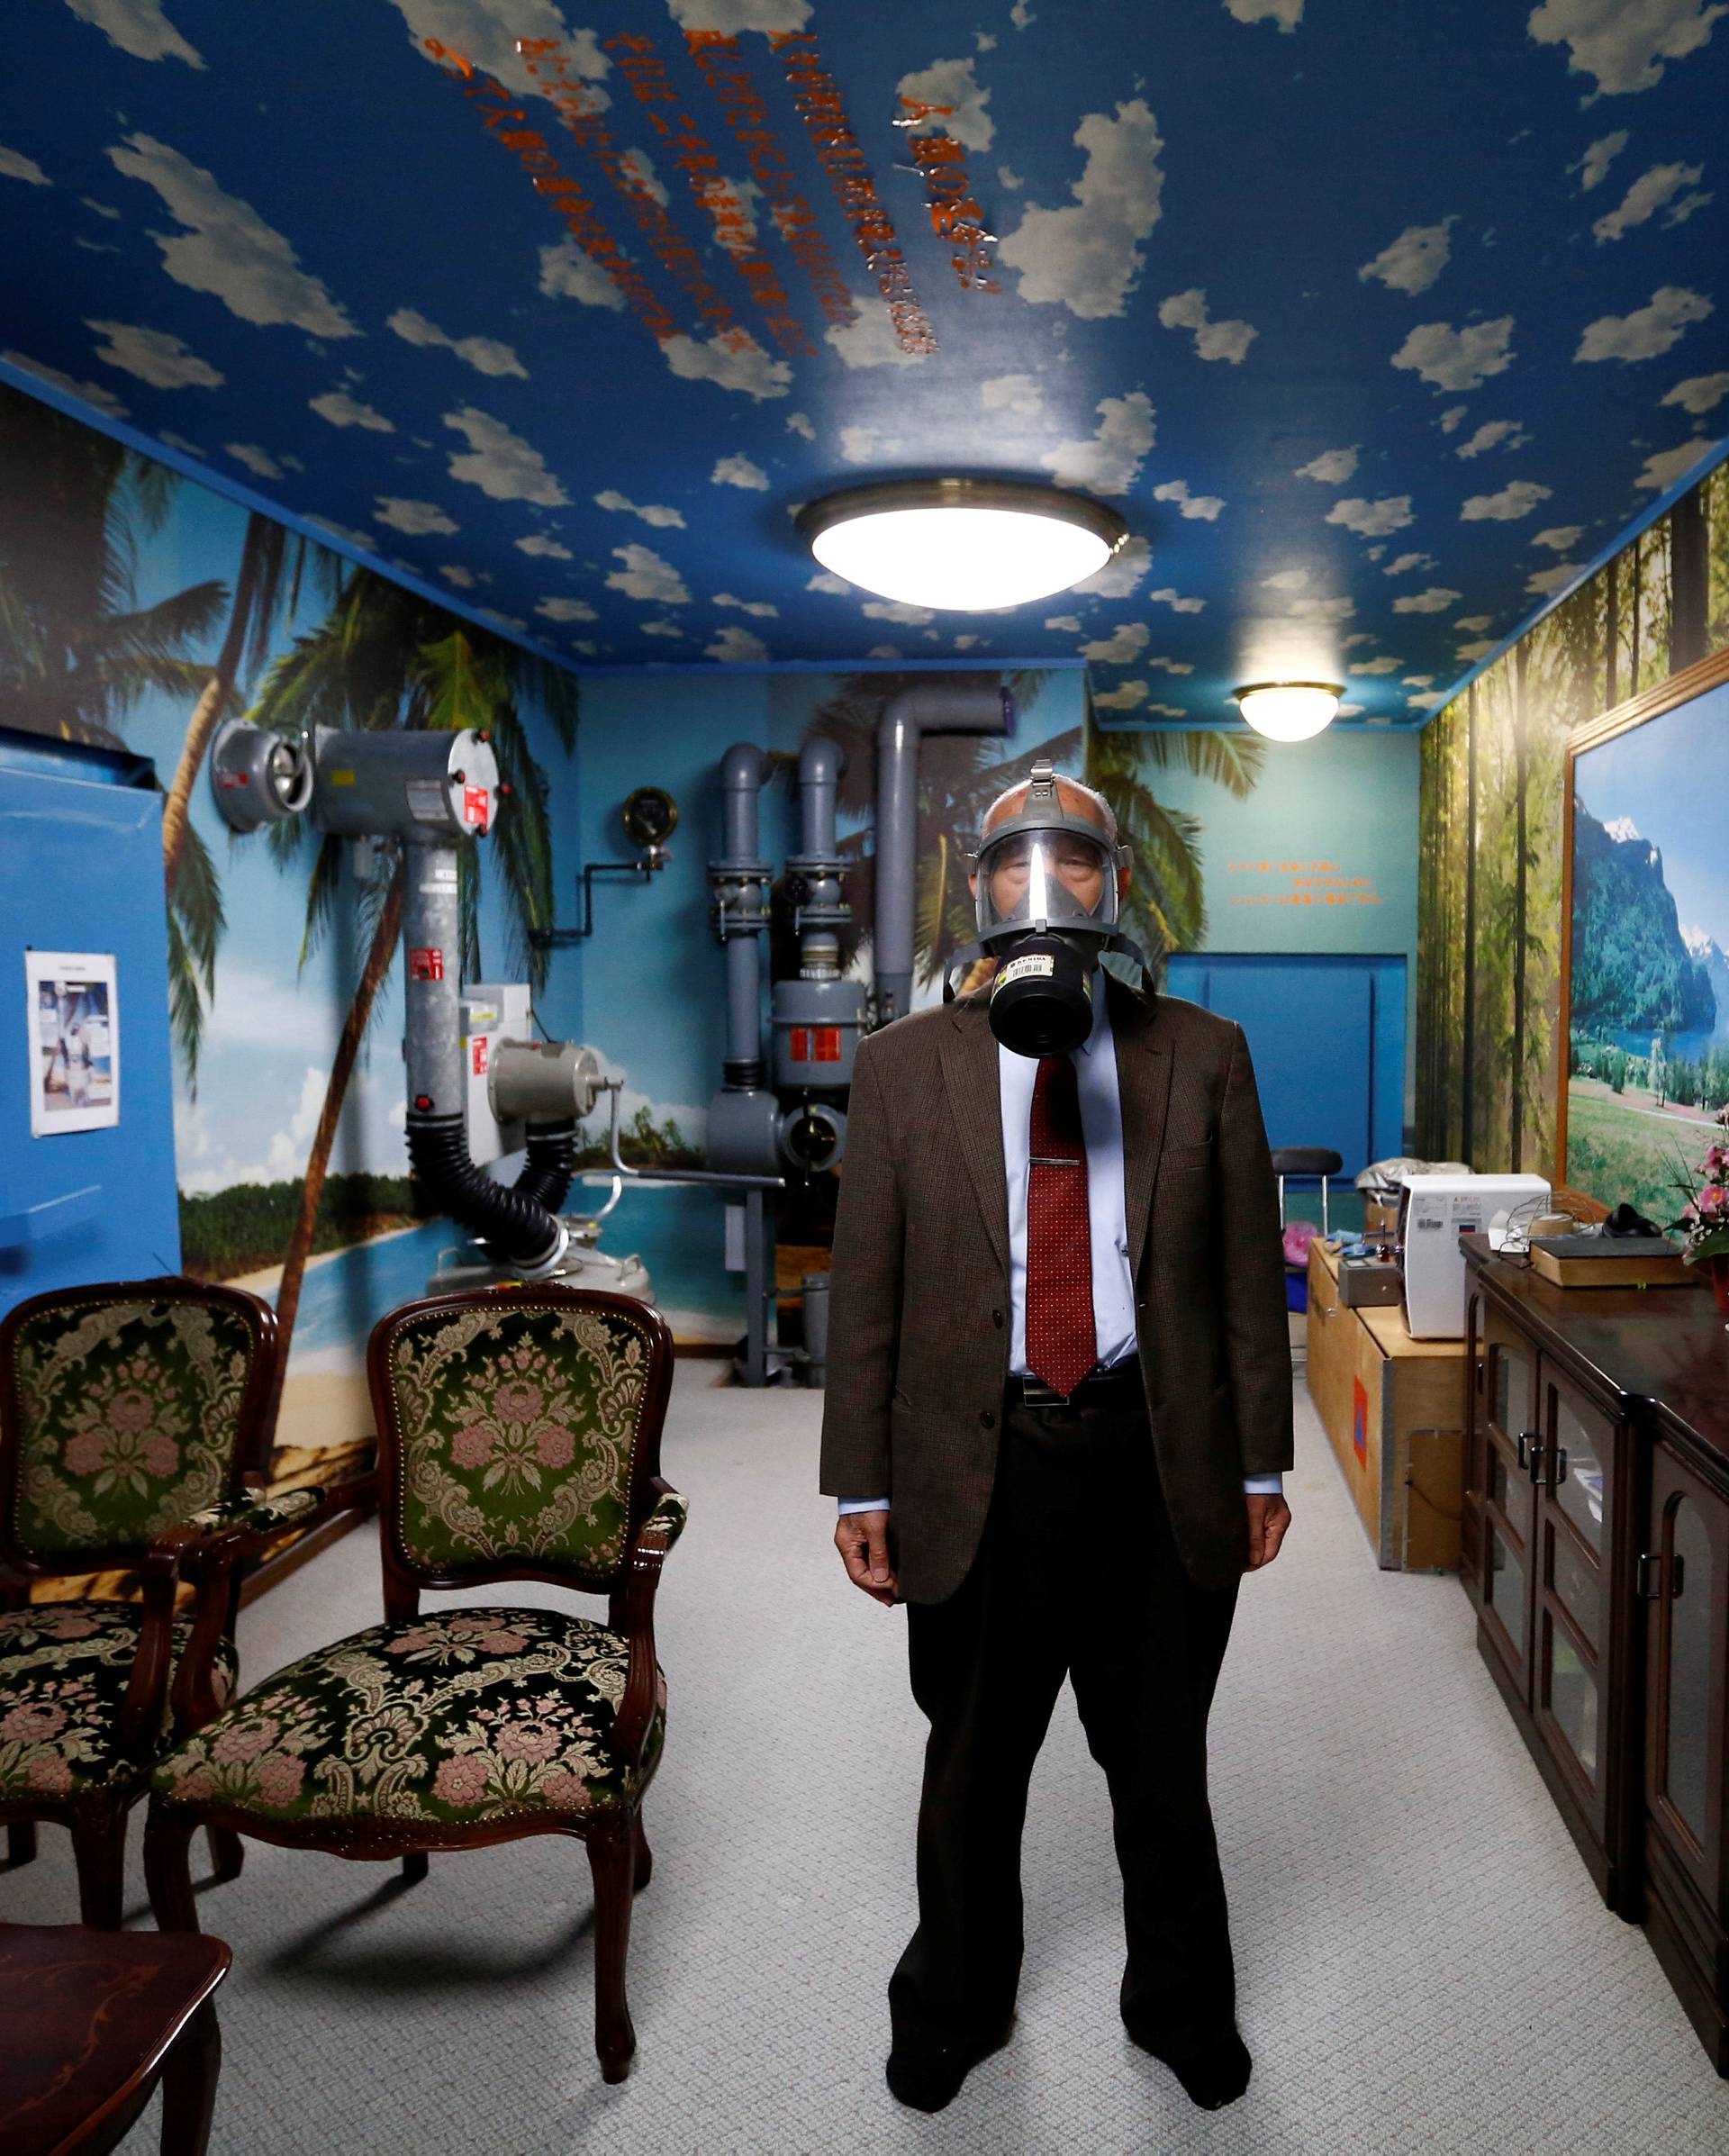 Seiichiro Nishimoto, CEO of Shelter Co., poses wearing a gas mask at a model room for the company's nuclear shelters in the basement of his house in Osaka